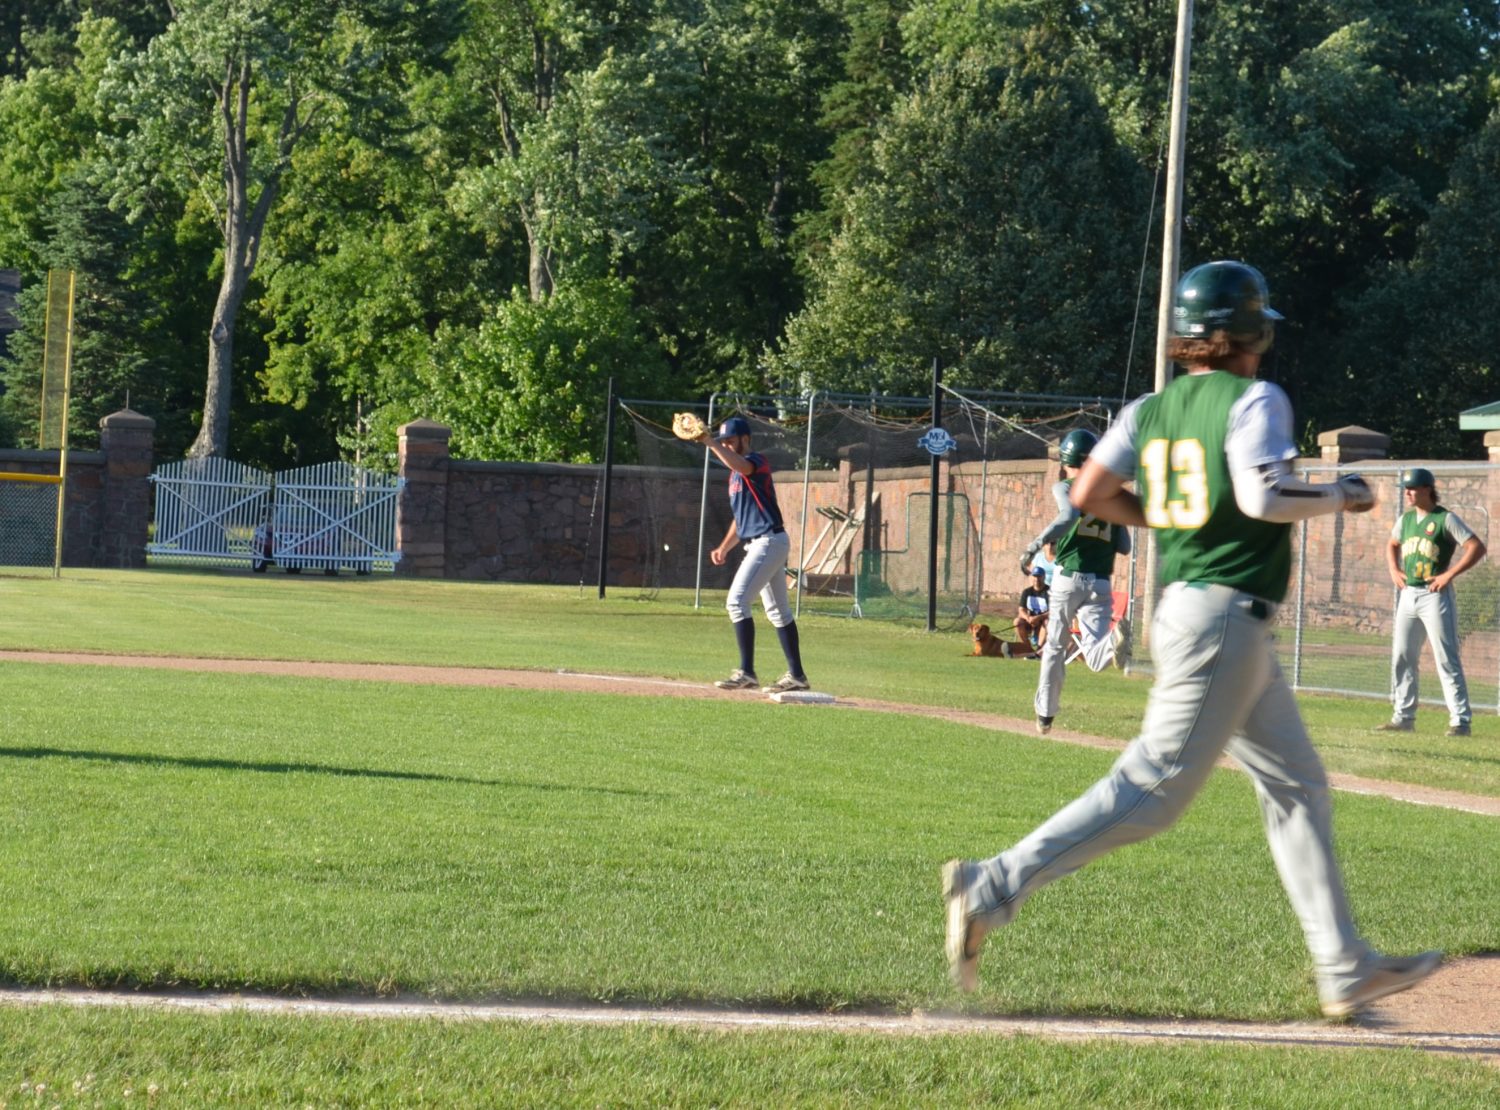 Friday night’s game ends in Post 46 loss